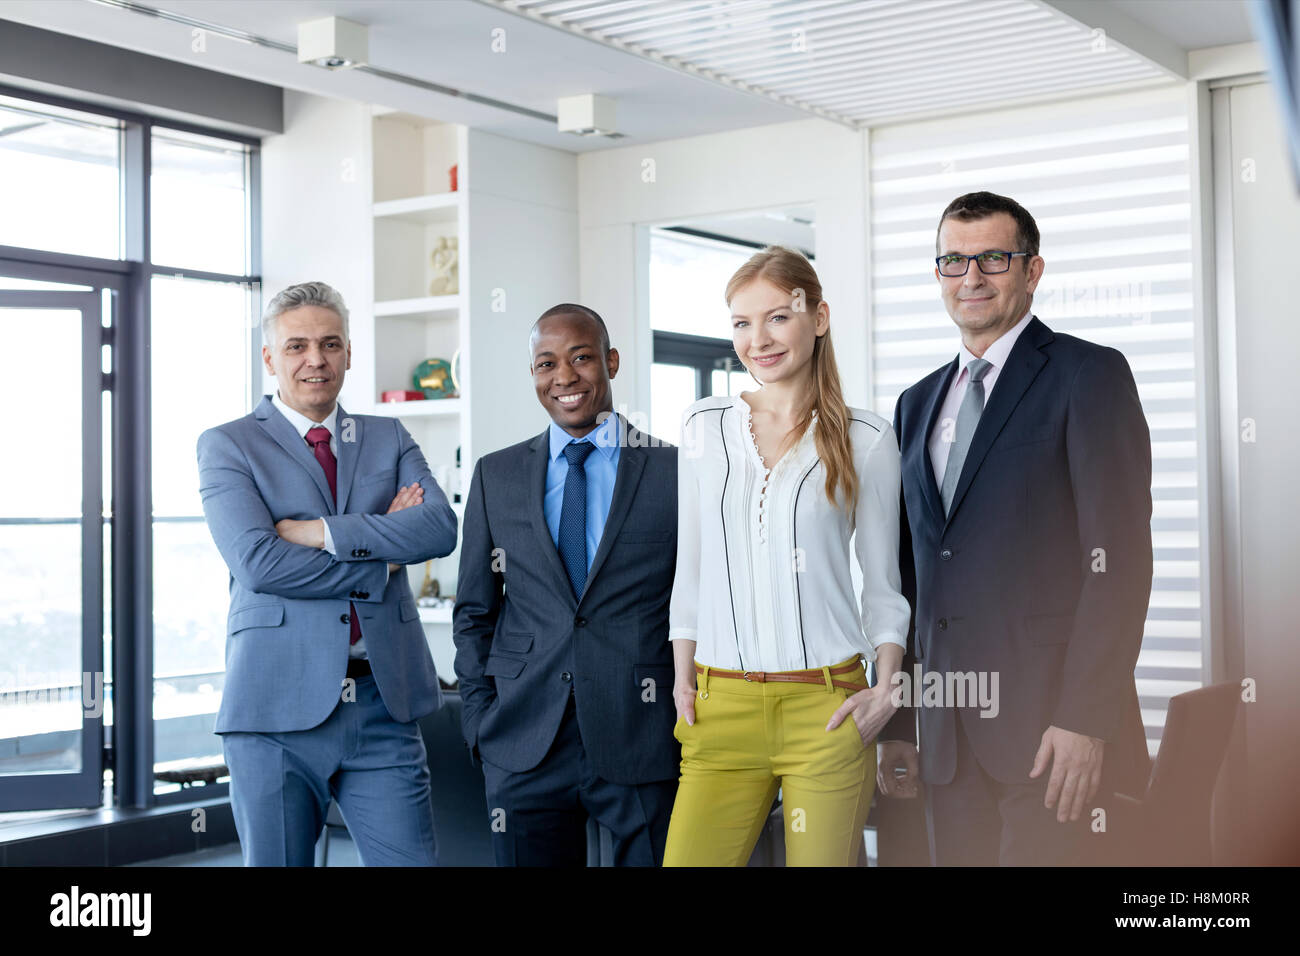 Portrait of multi-ethnic business people in office Banque D'Images